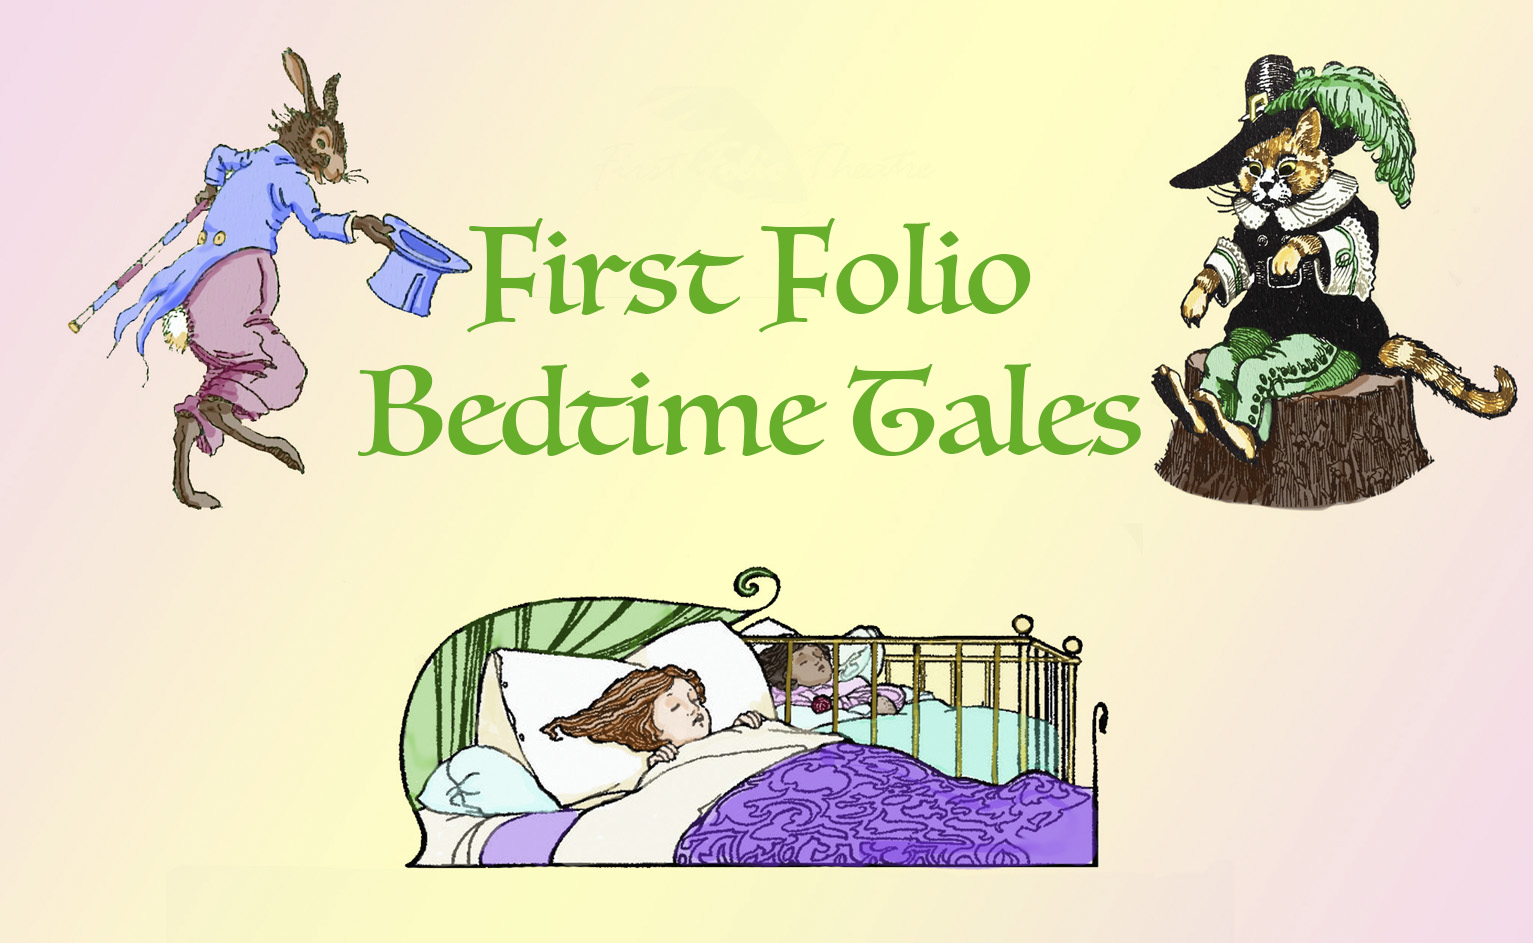 Logo for Bedtime Tales, with a little girl sleeping in bed, dreaming about a rabbit in a blue coat and a orange cat in a black and green outfit.